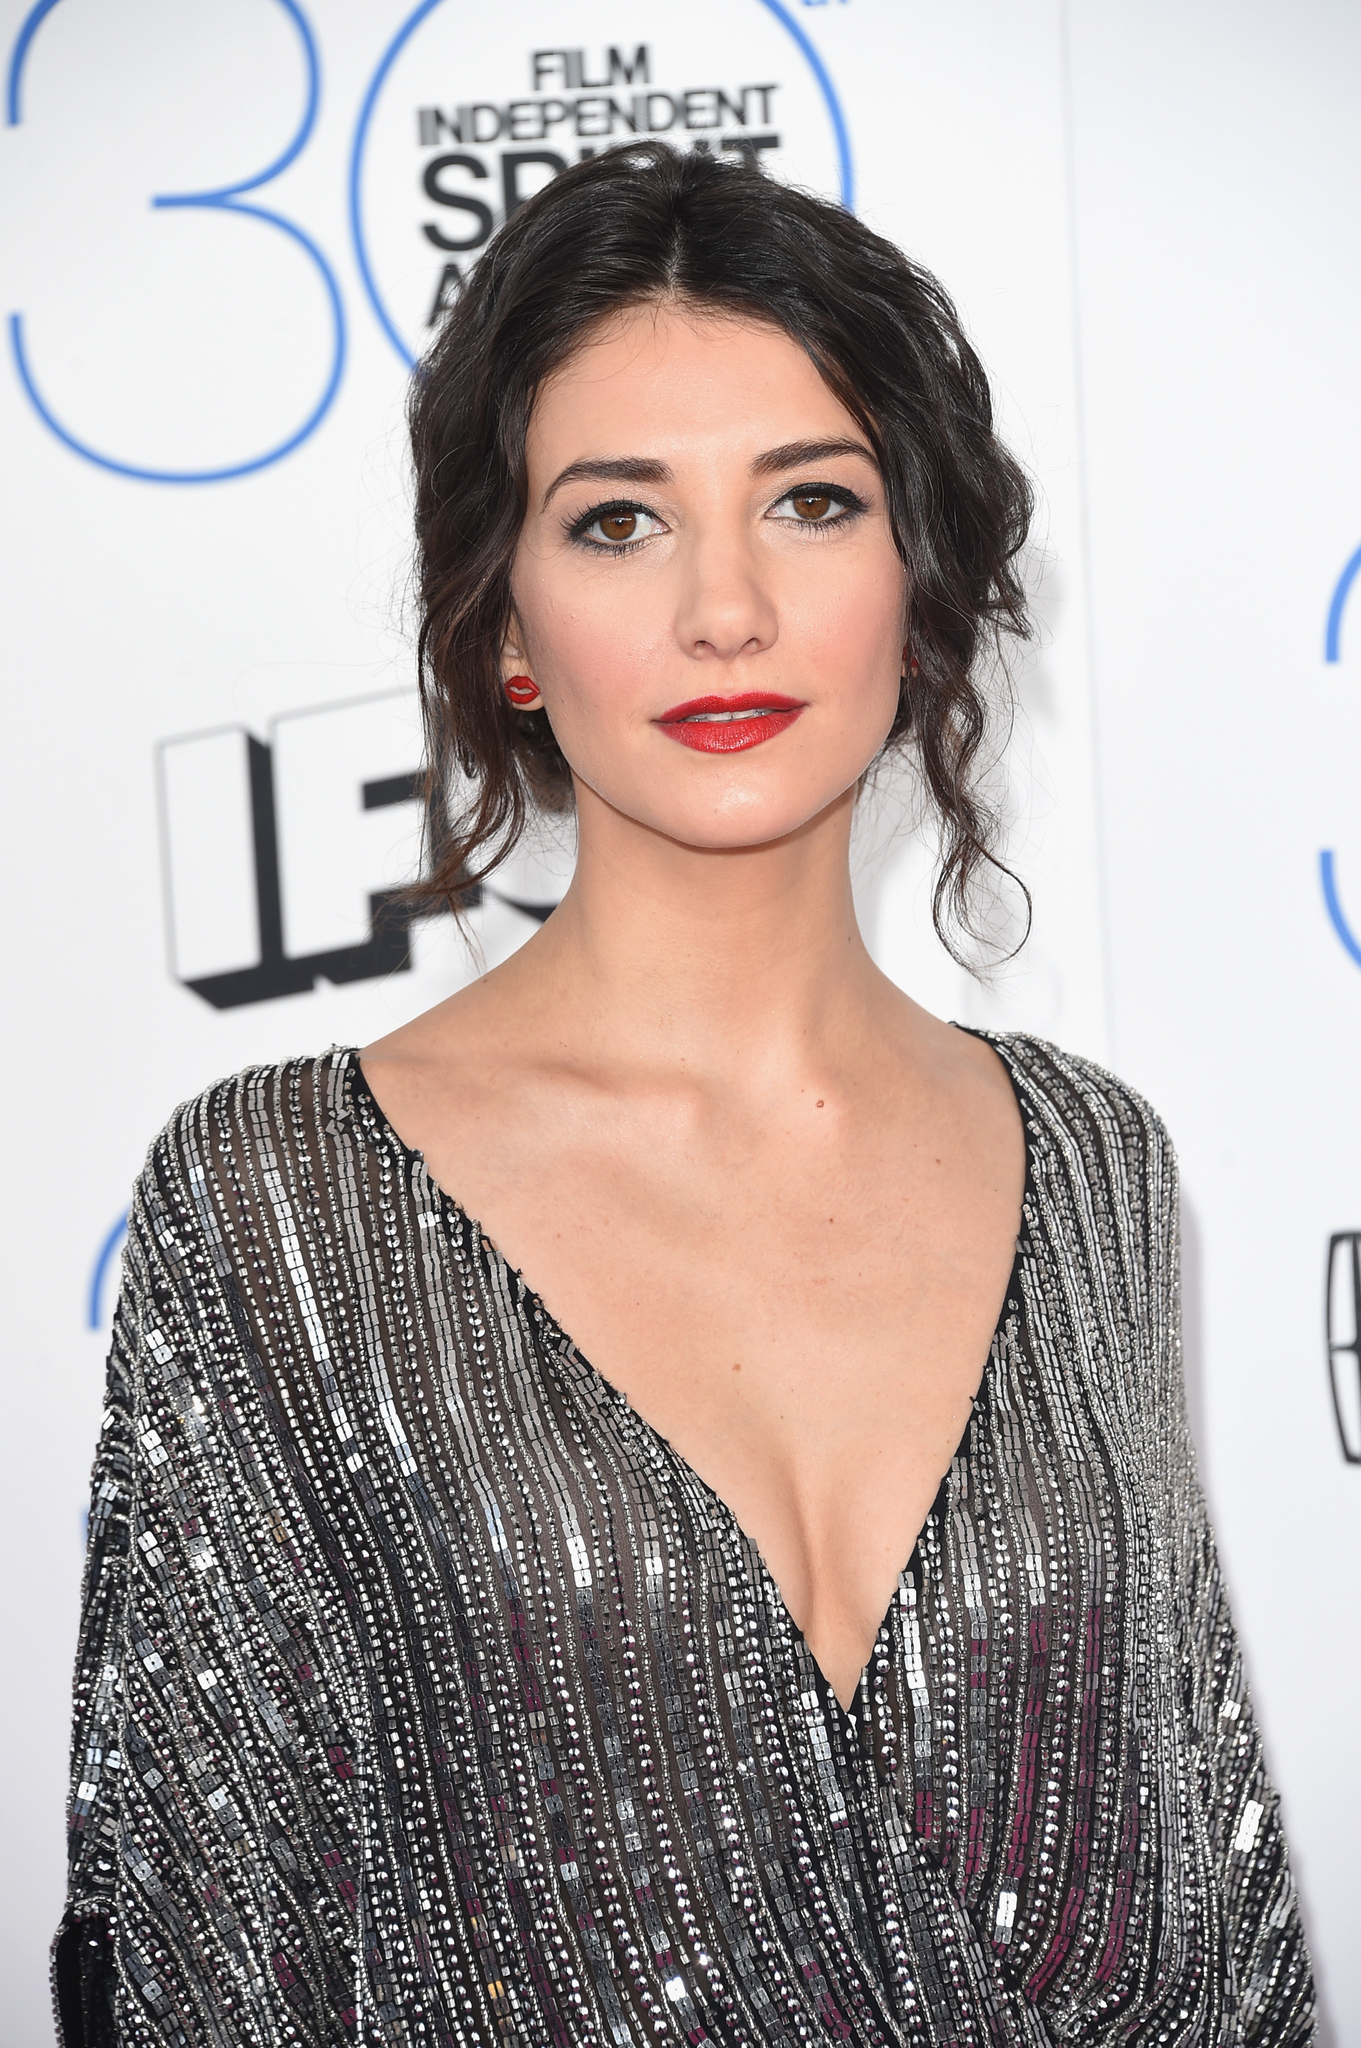 Sheila Vand at event of 30th Annual Film Independent Spirit Awards (2015)